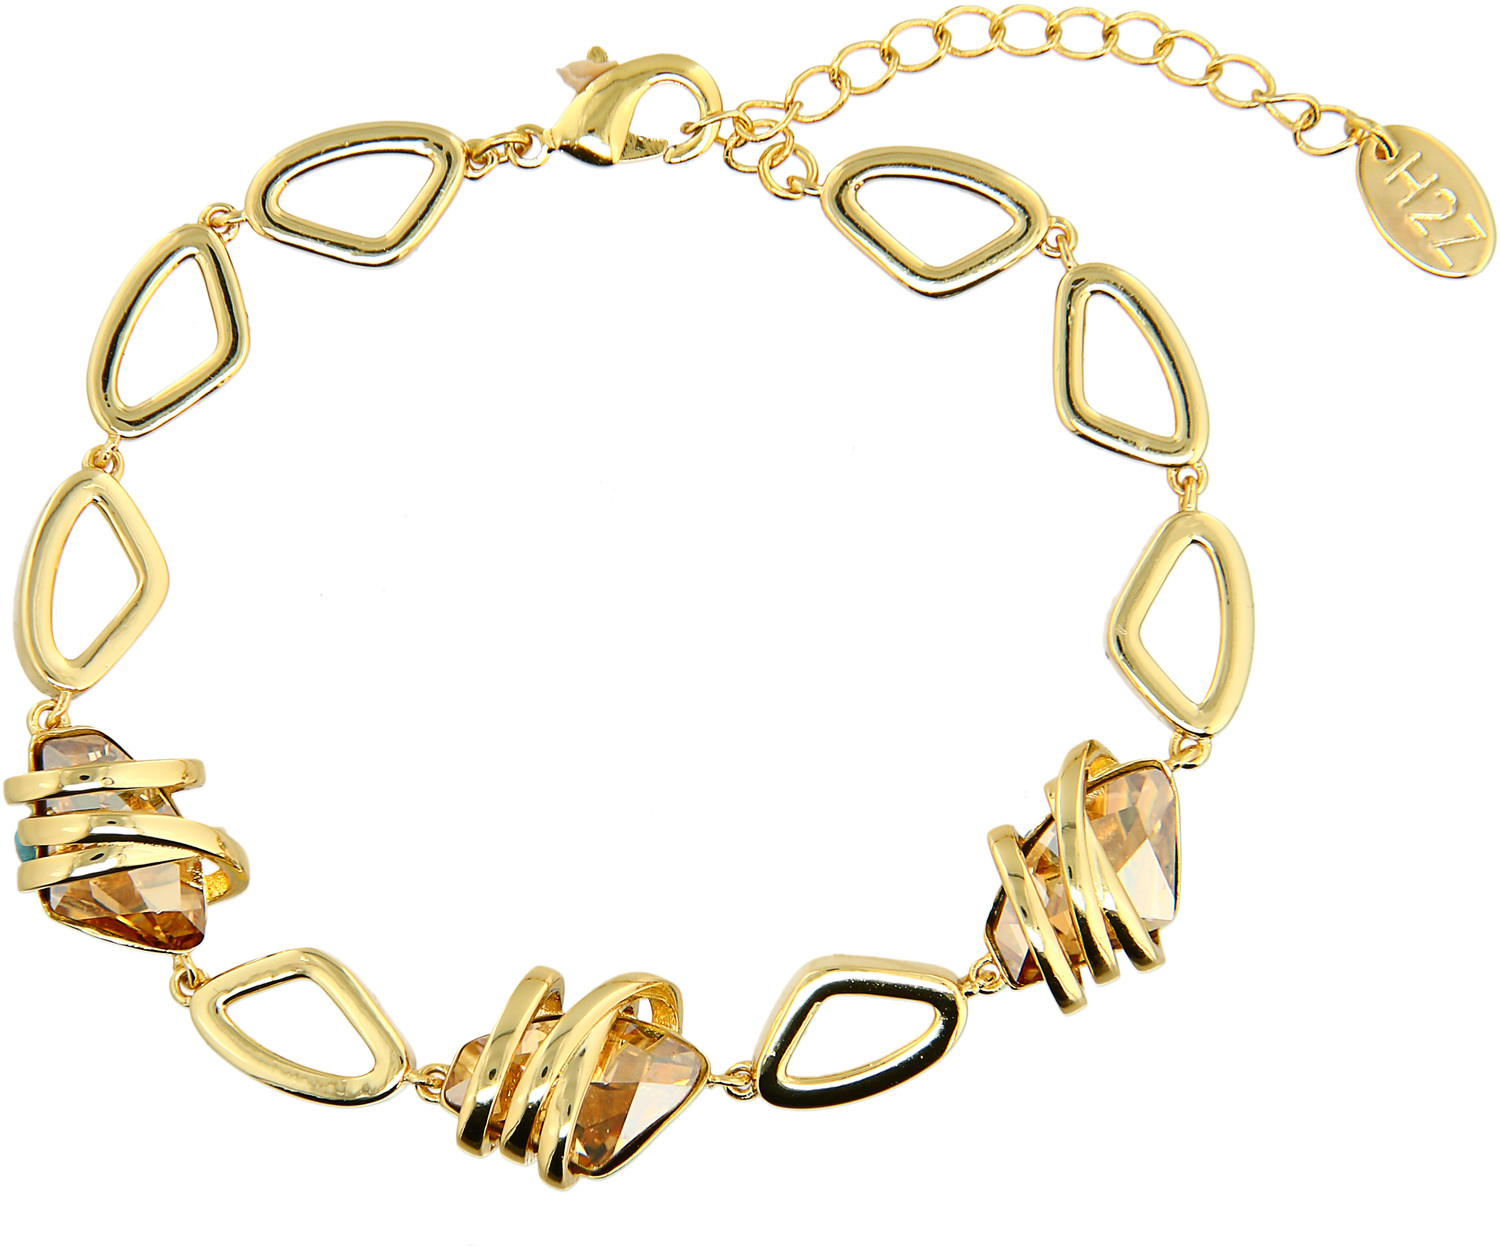 Crystal Golden Shadow Galactic by H2Z Made with Swarovski Elements - Crystal Golden Shadow Galactic - Gold Plated Austrian Element Bracelet